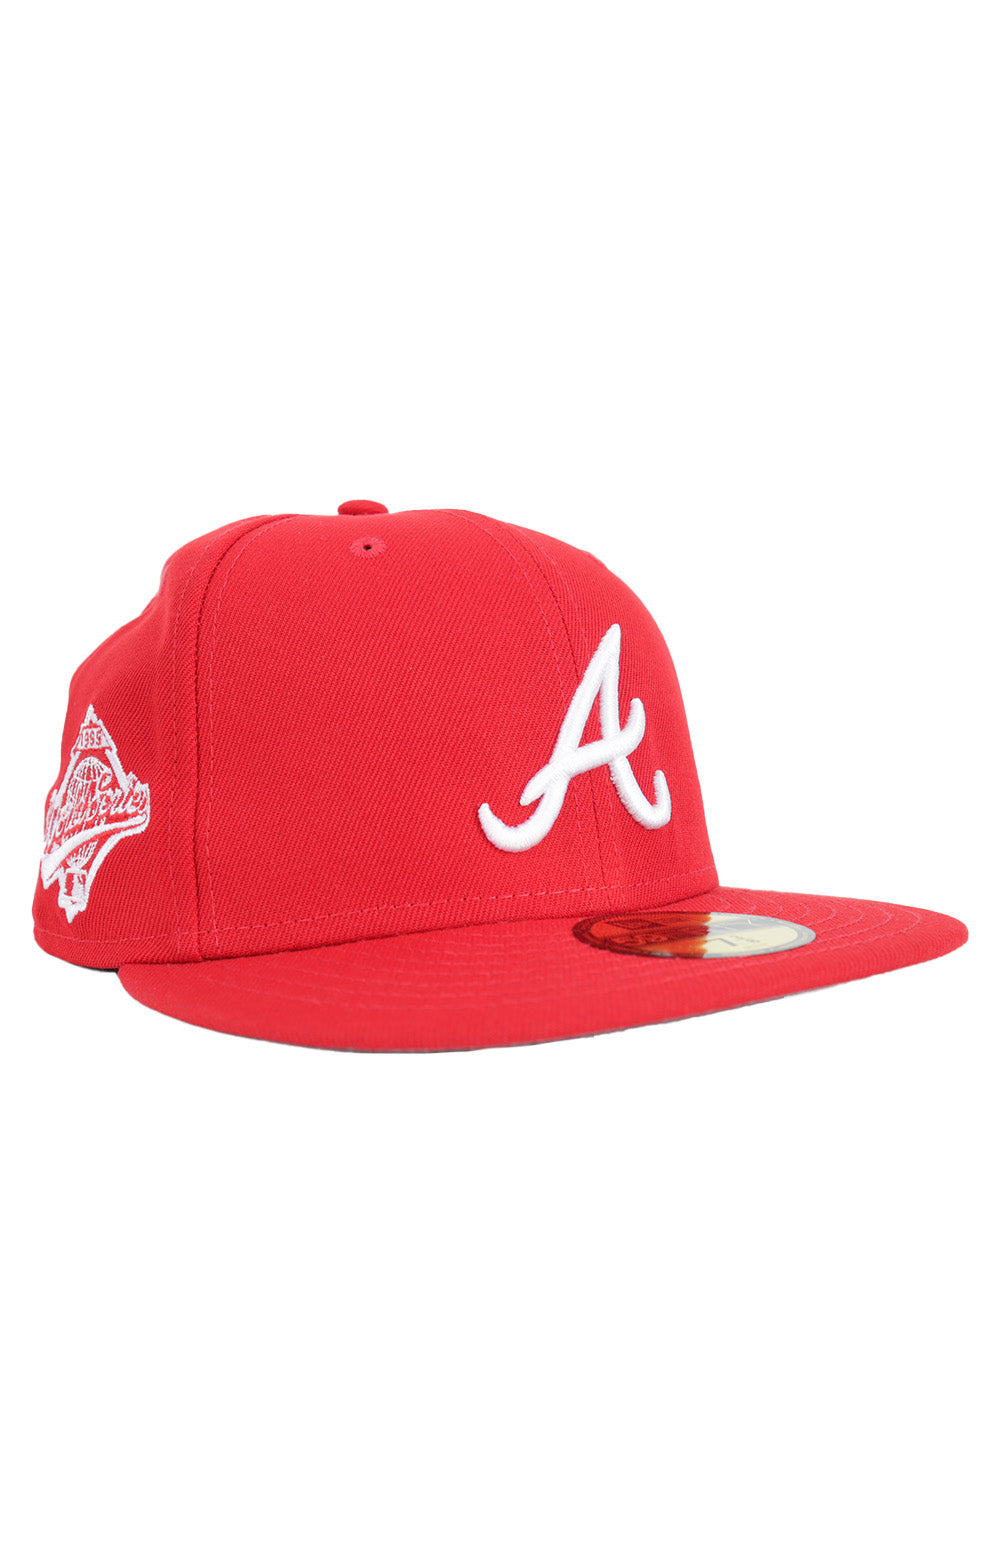 Atlanta Braves 95 World Series Patch Up 59FIFTY Fitted Hat - Scarlet Red